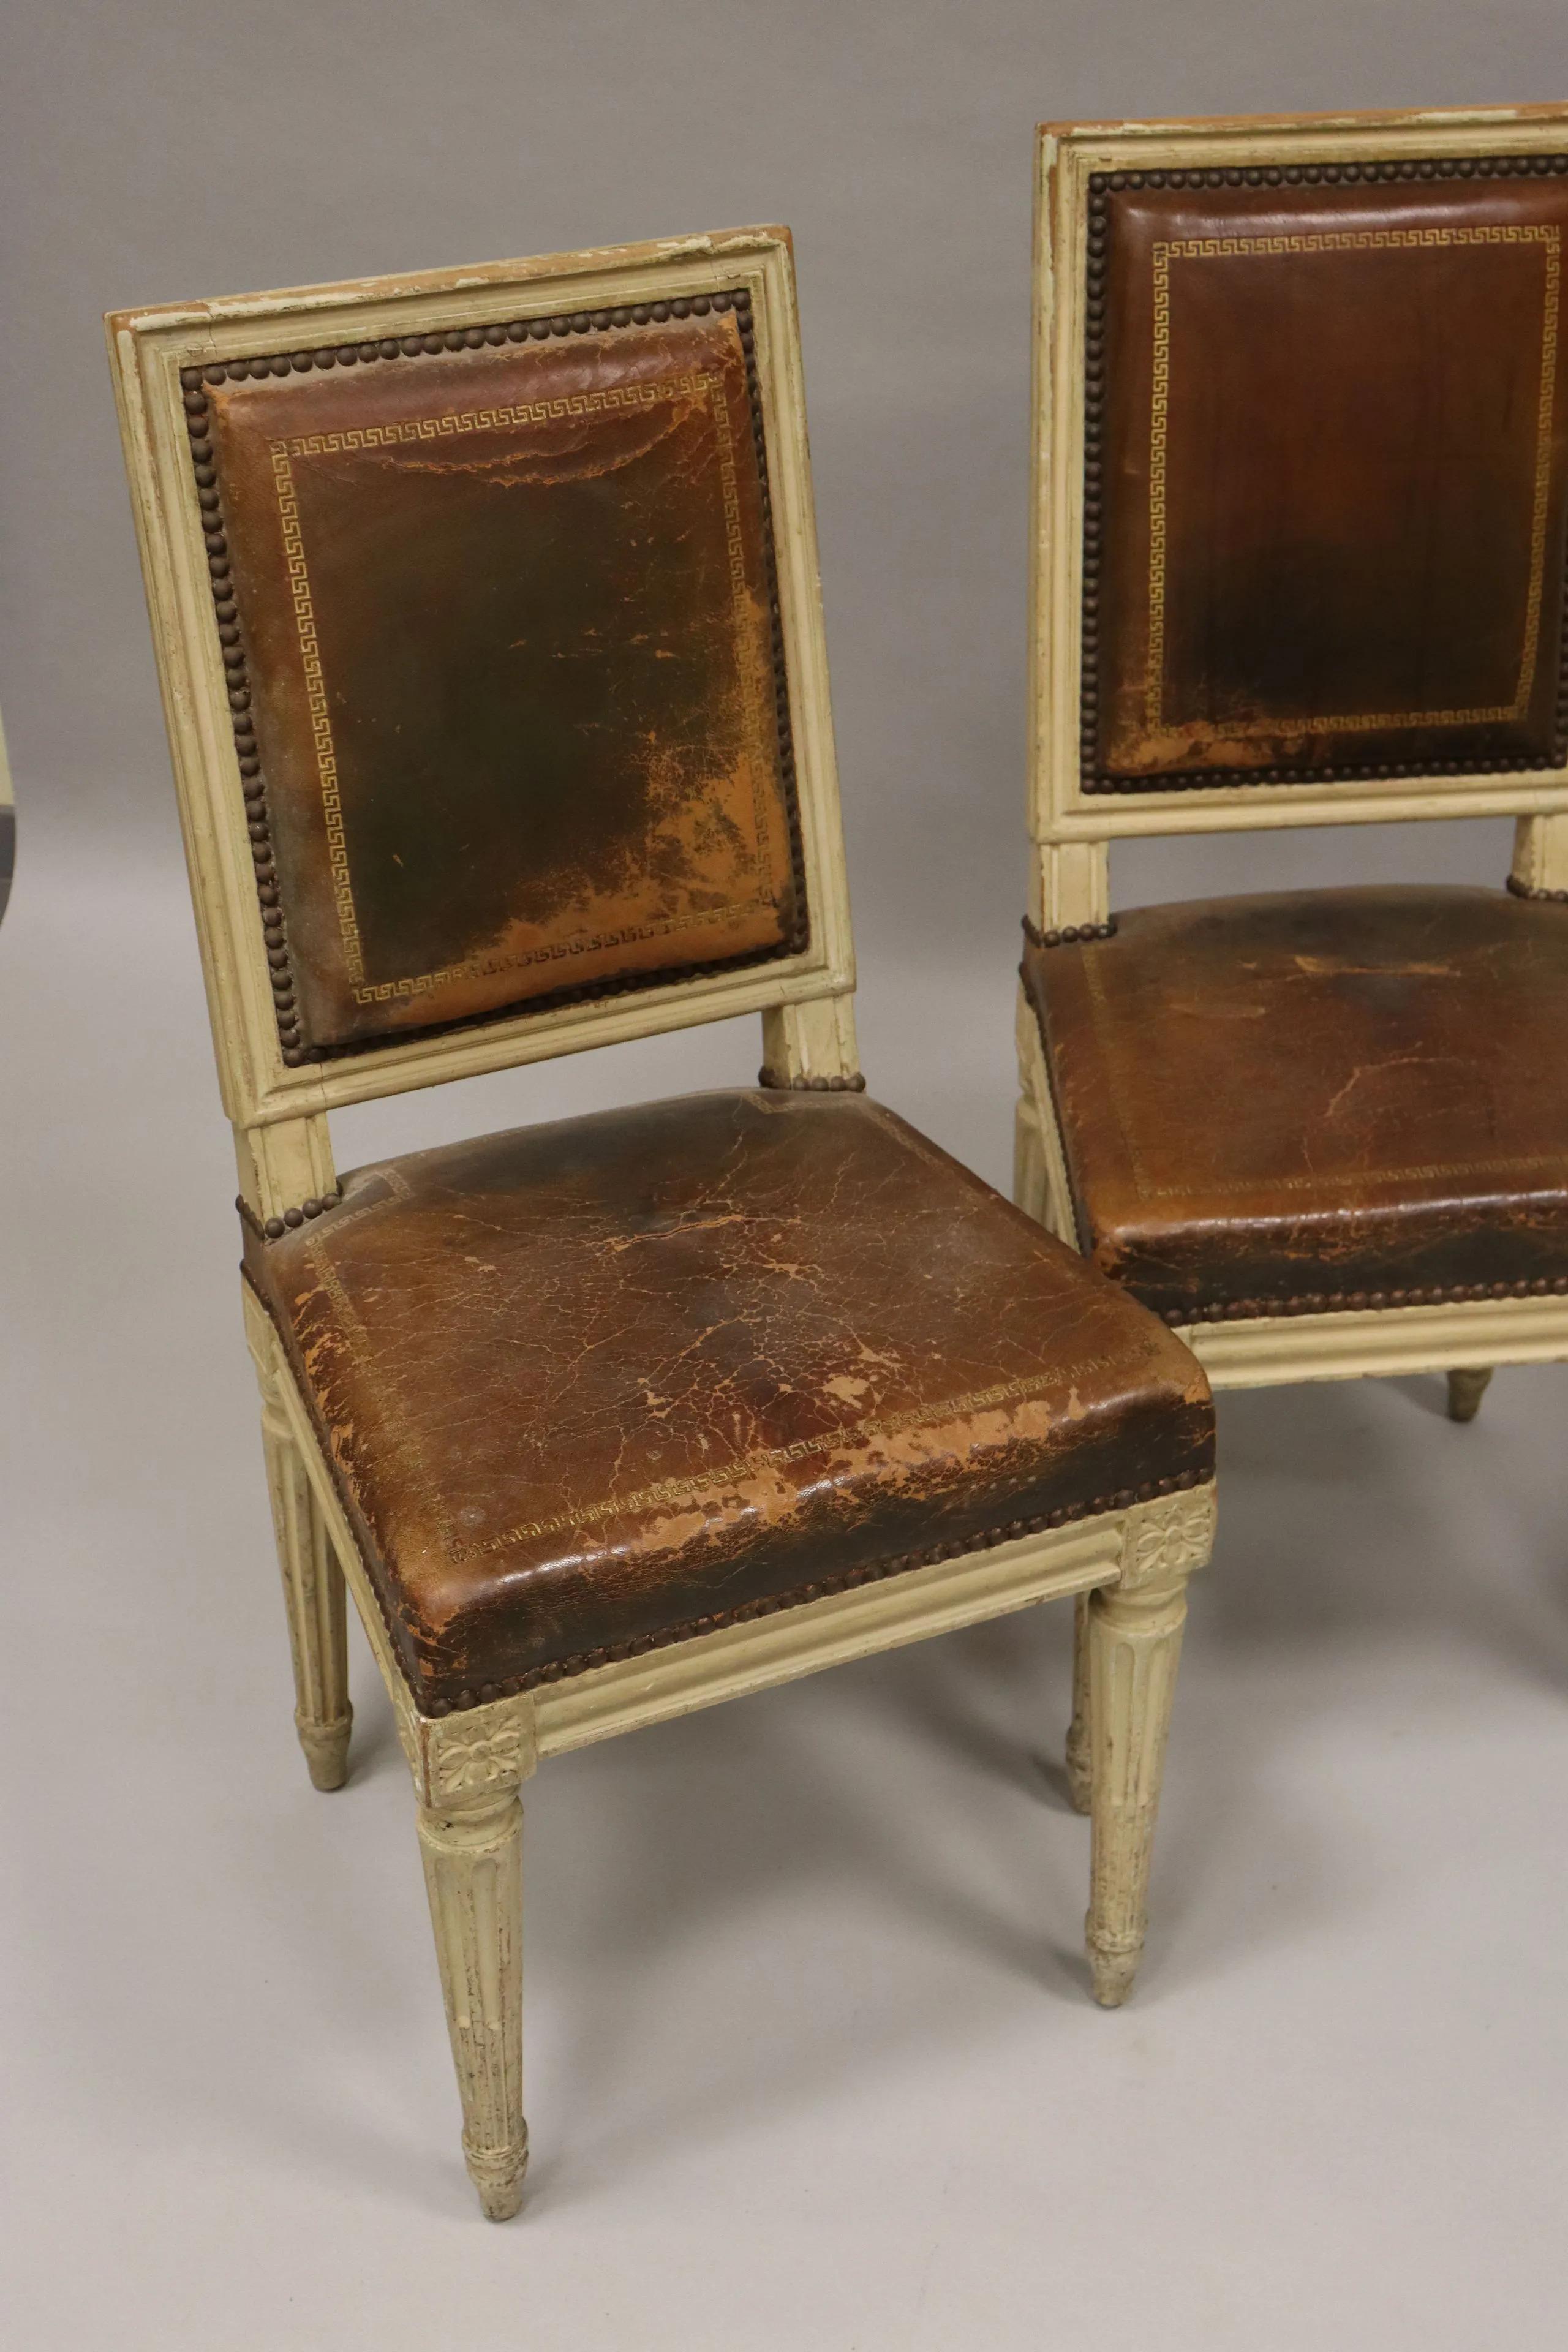 Armand Albert Rateau (1882-1938) suite of four neo classic Louis XVI style chairs in molded beech, leather seat.
Original condition, stamped and numbered.
Very nice provenance.